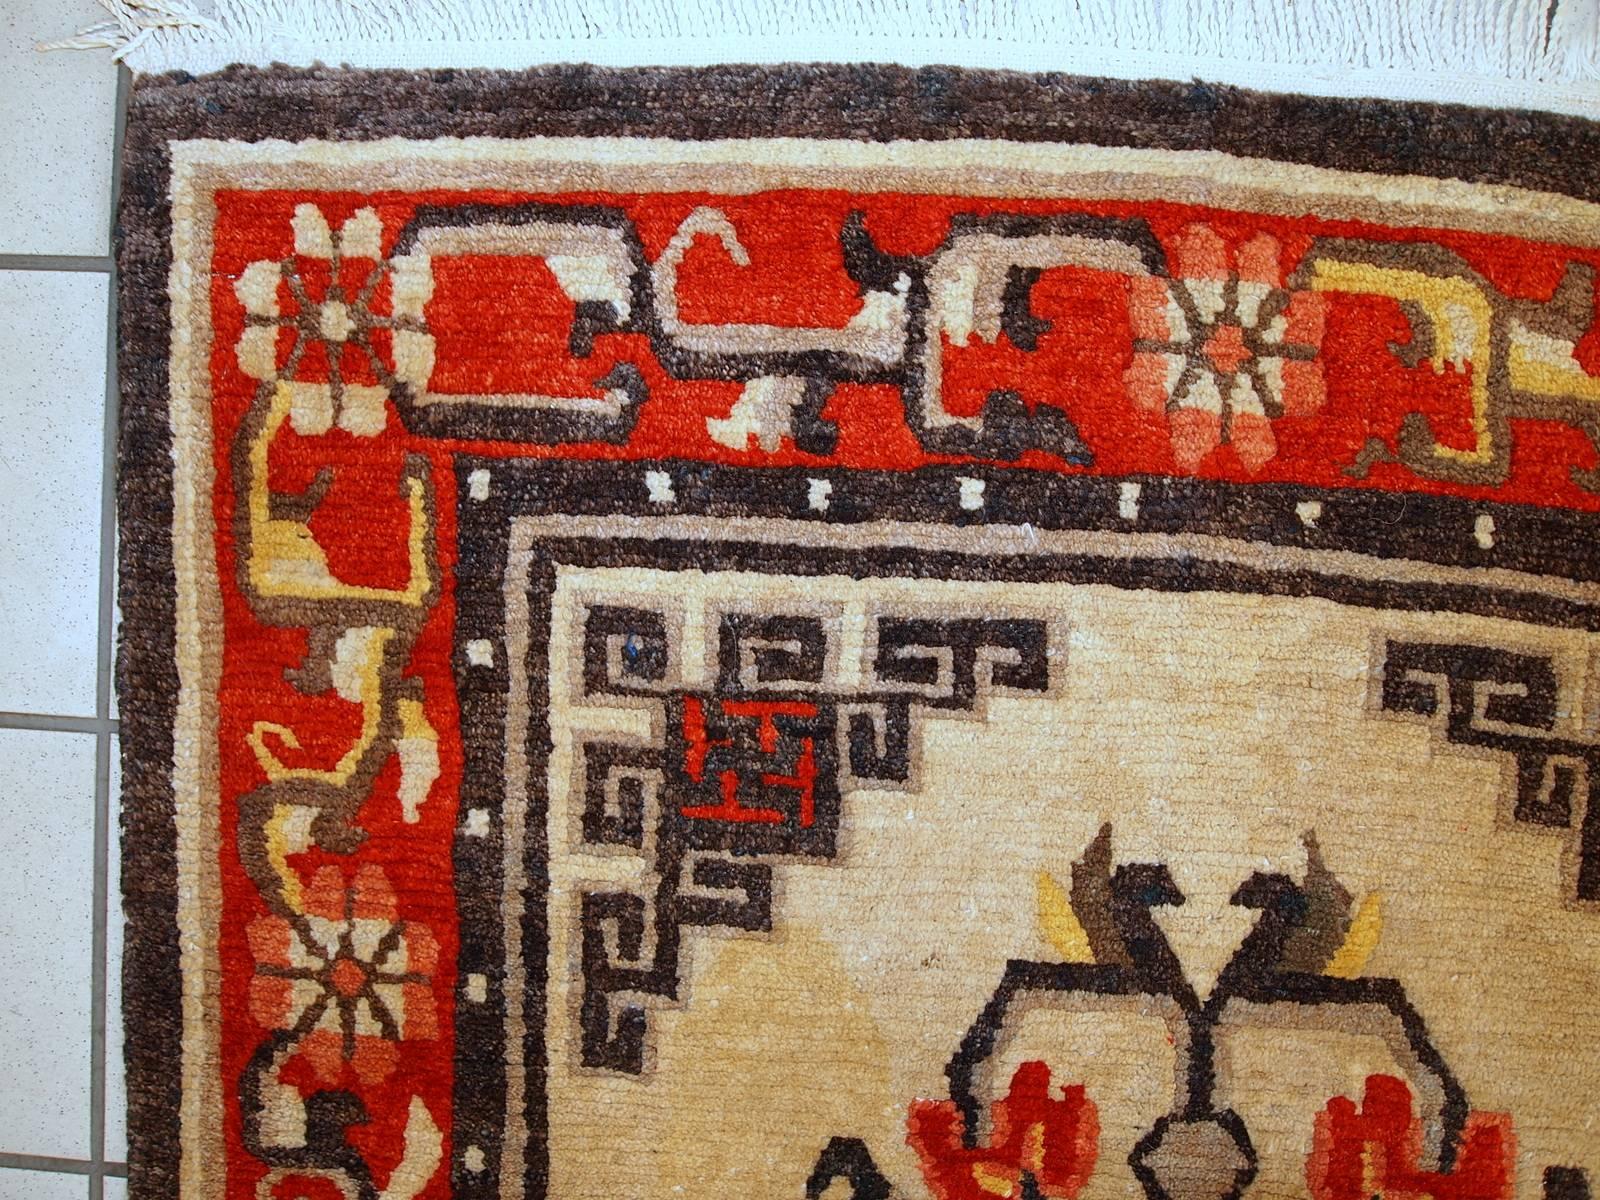 Beautiful vintage Mongolian rug in original condition. The rug was made in beige shade with tribal design in the center and bright red border. The rug is from the end of 20th century and in original great condition. Full pile, no holes or stains.